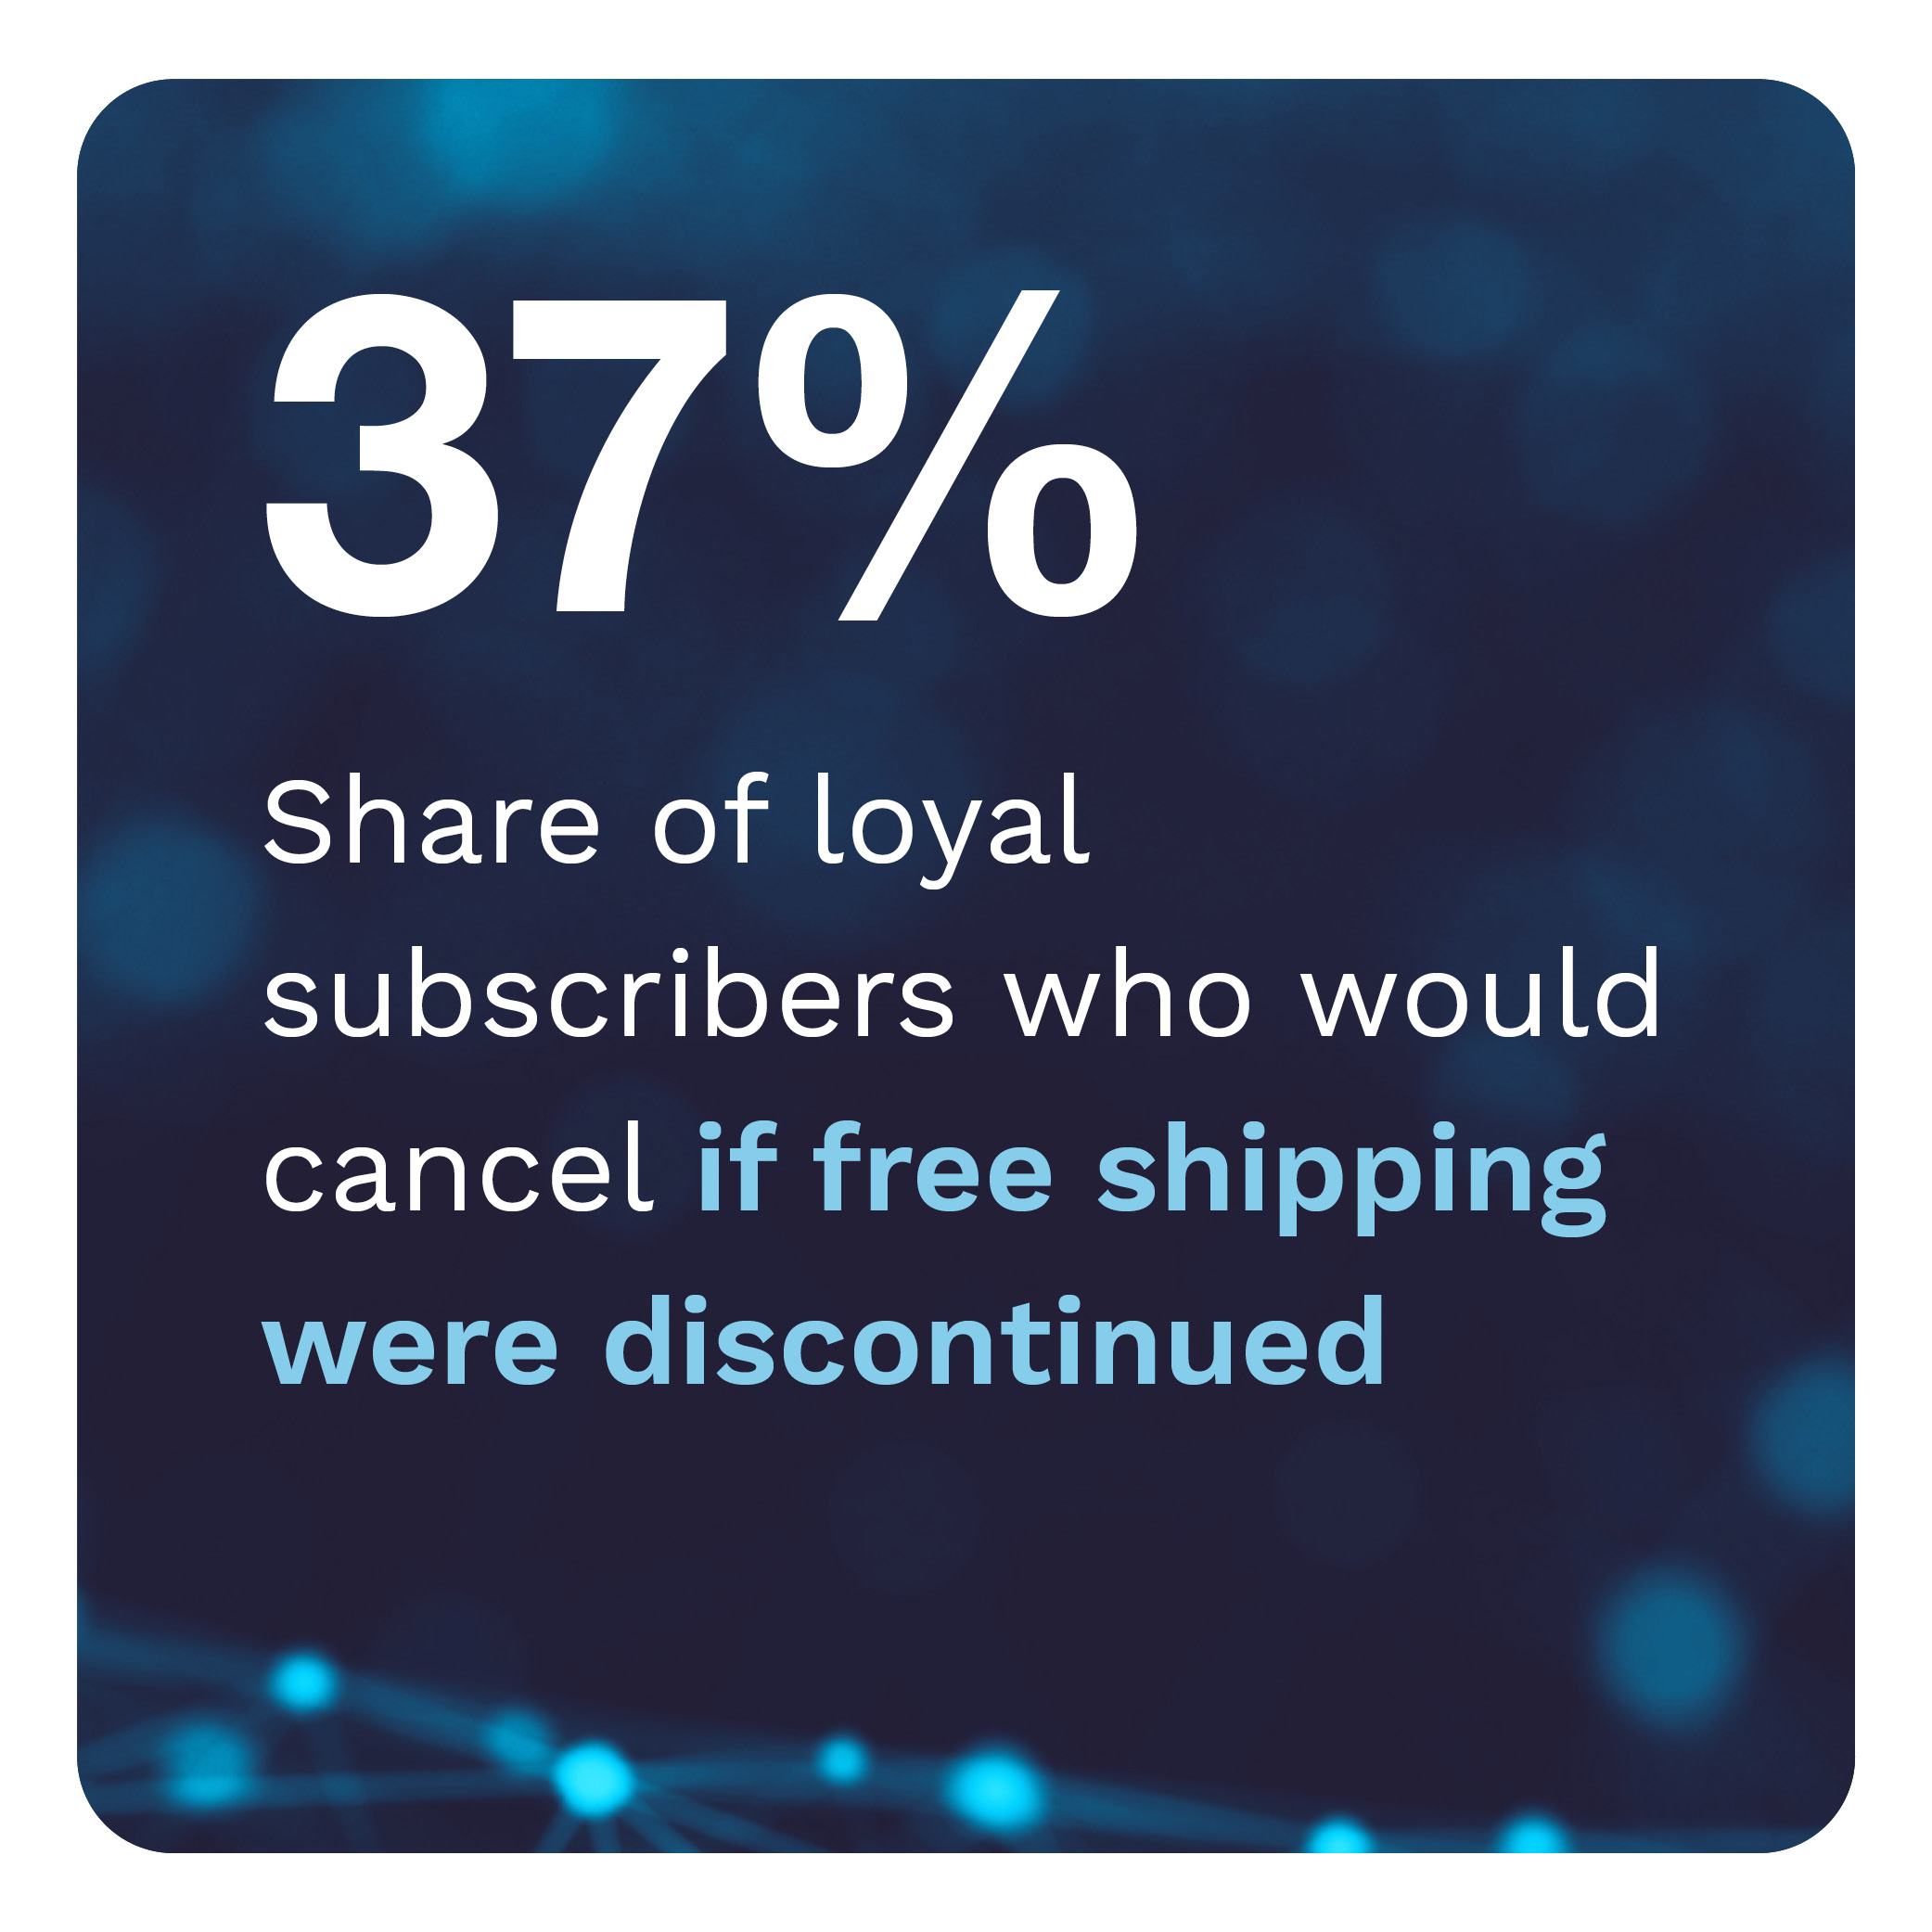 37%: Share of loyal subscribers who would cancel if free shipping were discontinued